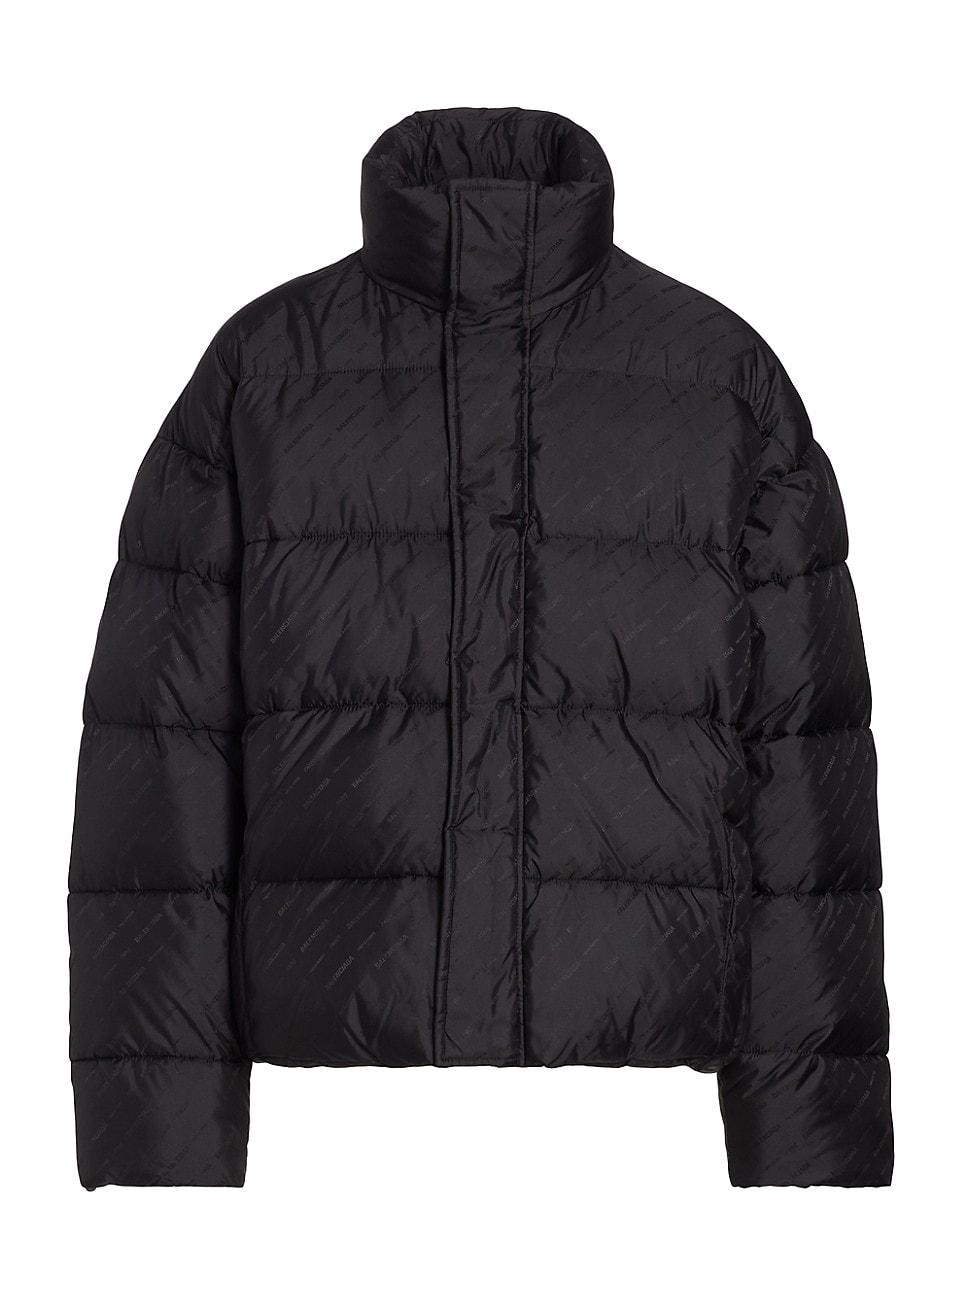 Balenciaga Jacquard Quilted Puffer Jacket in Black for Men | Lyst